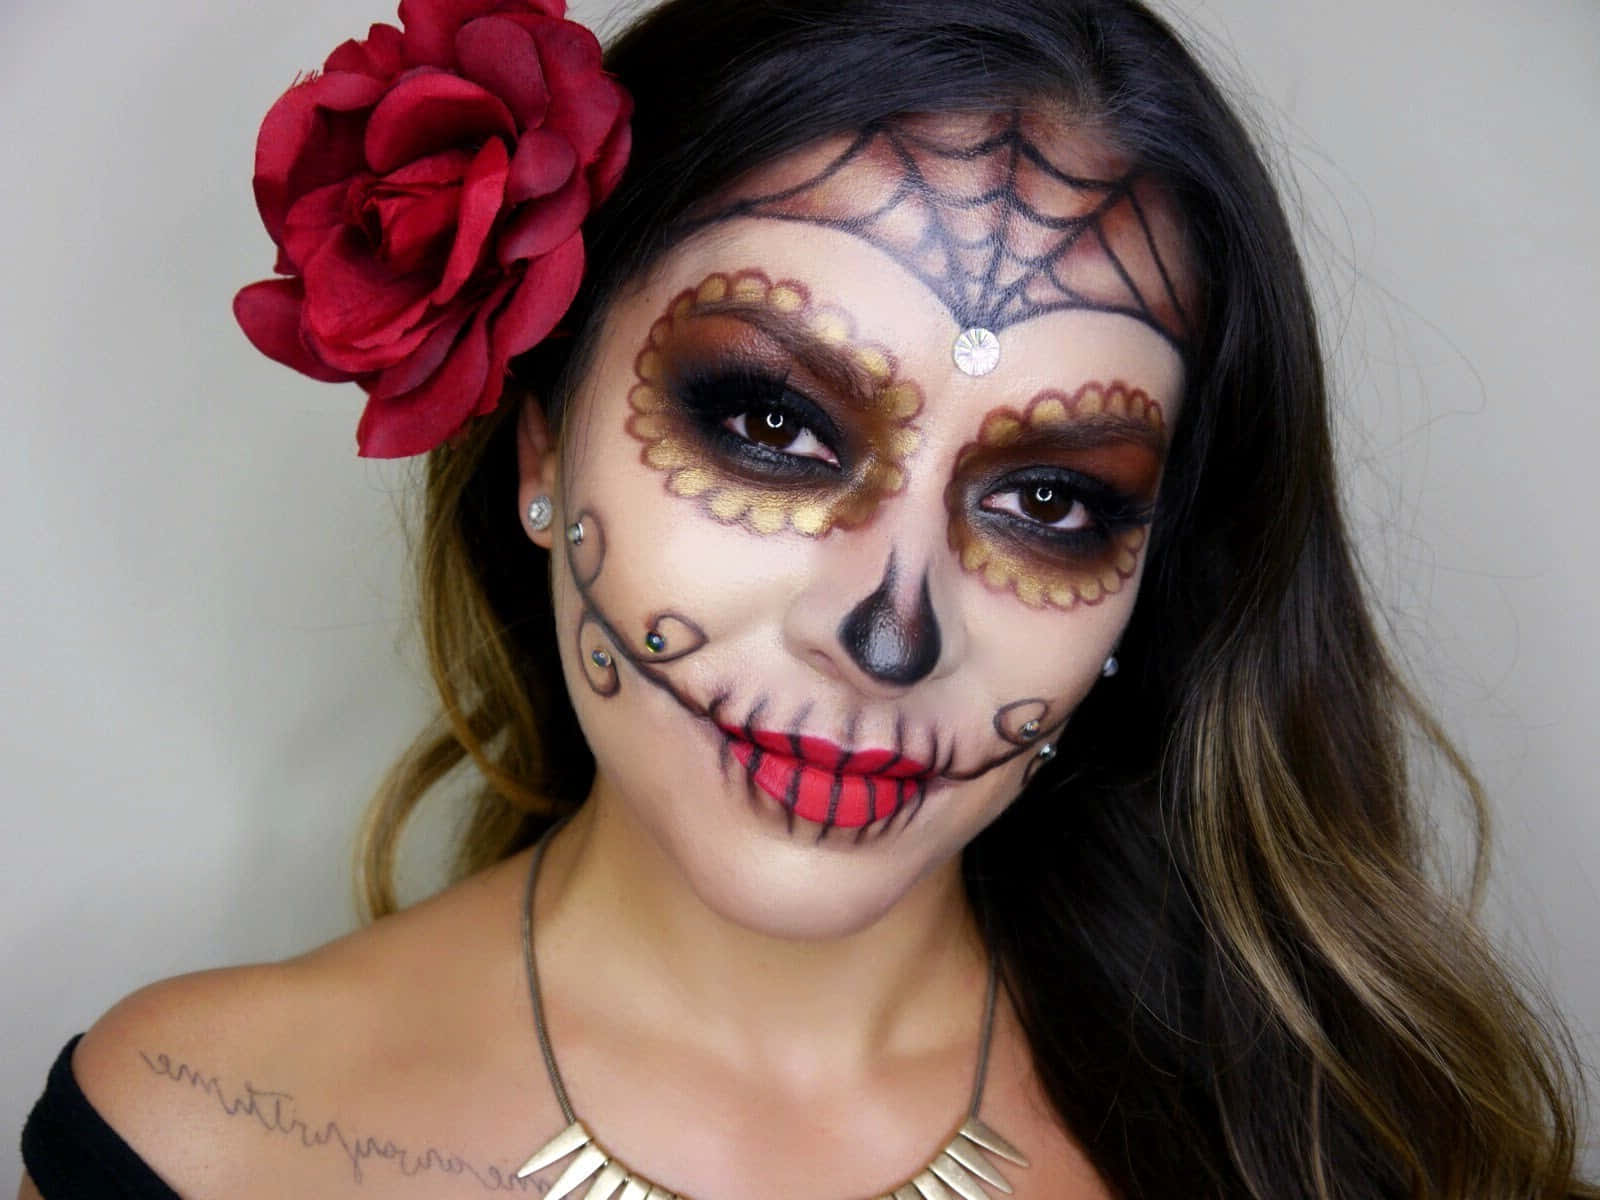 Transform your look with Halloween make-up this season! Wallpaper